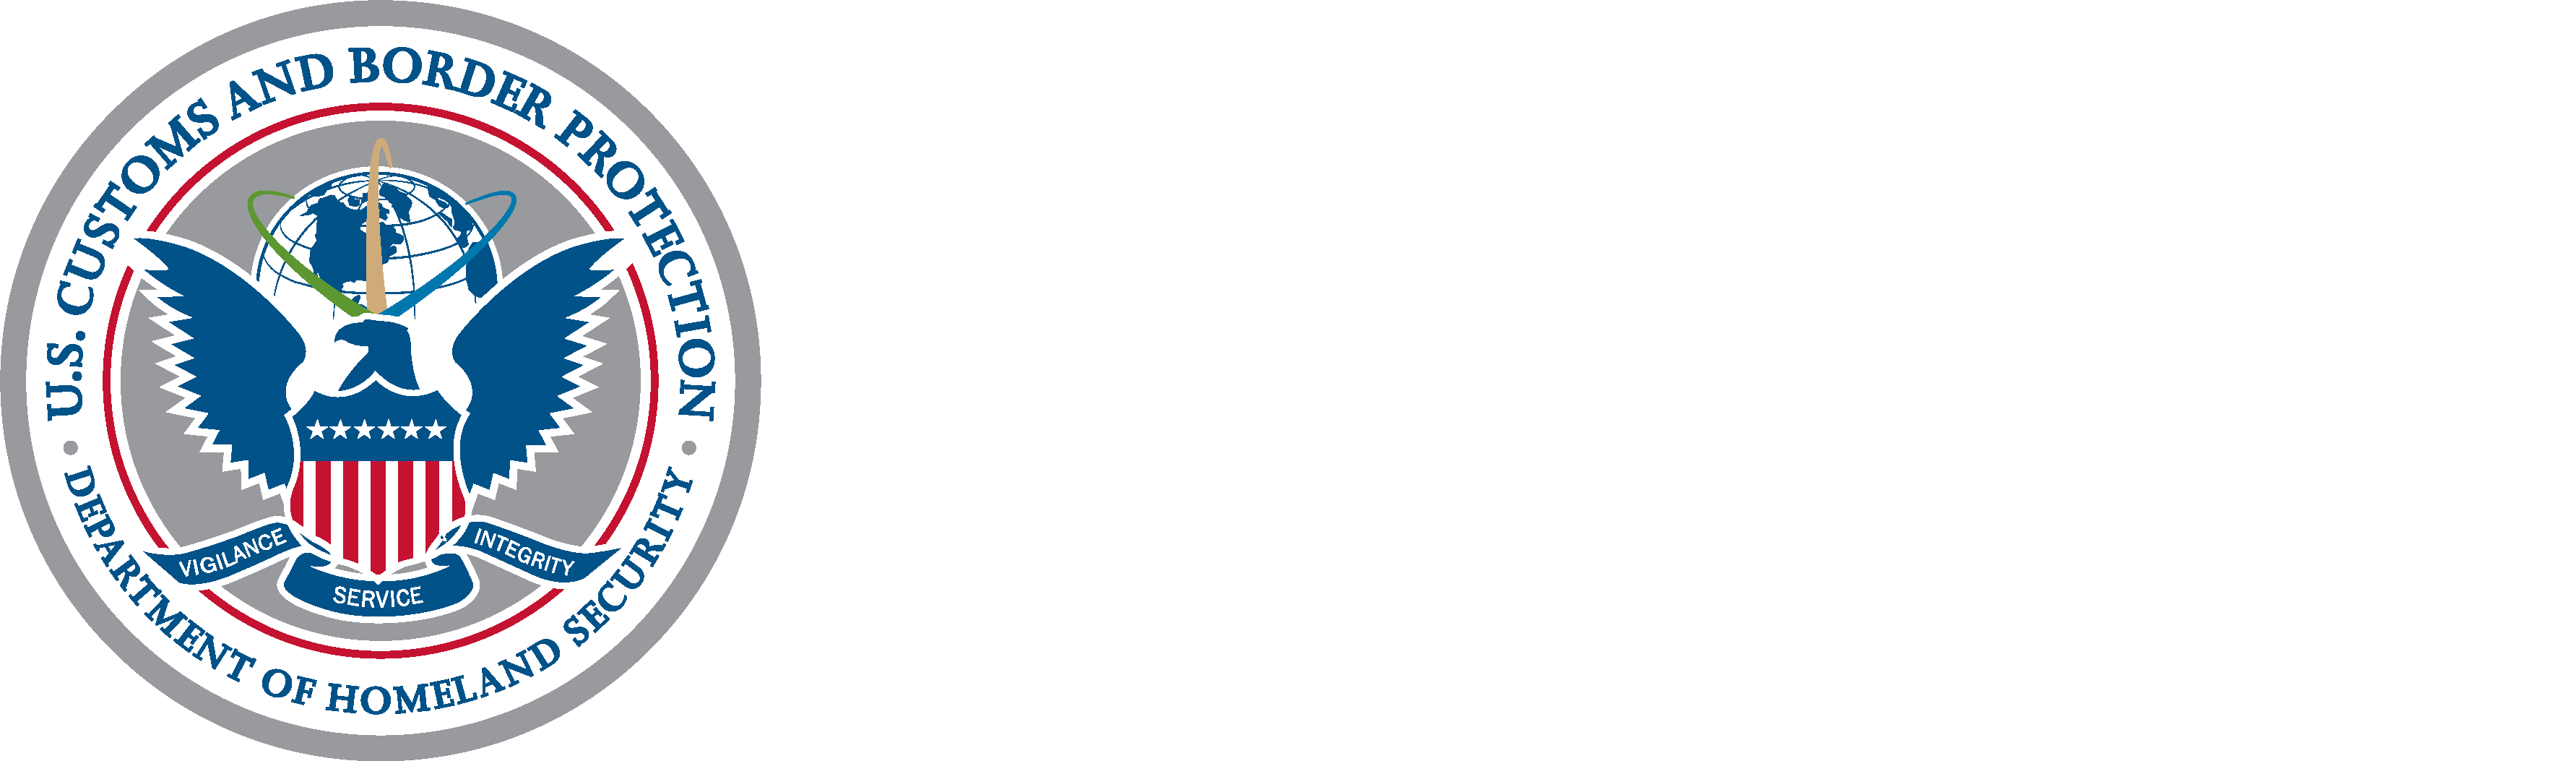 U.S. Customs and Border Protection: Department of Homeland Security logo links to CBP.gov Home Page